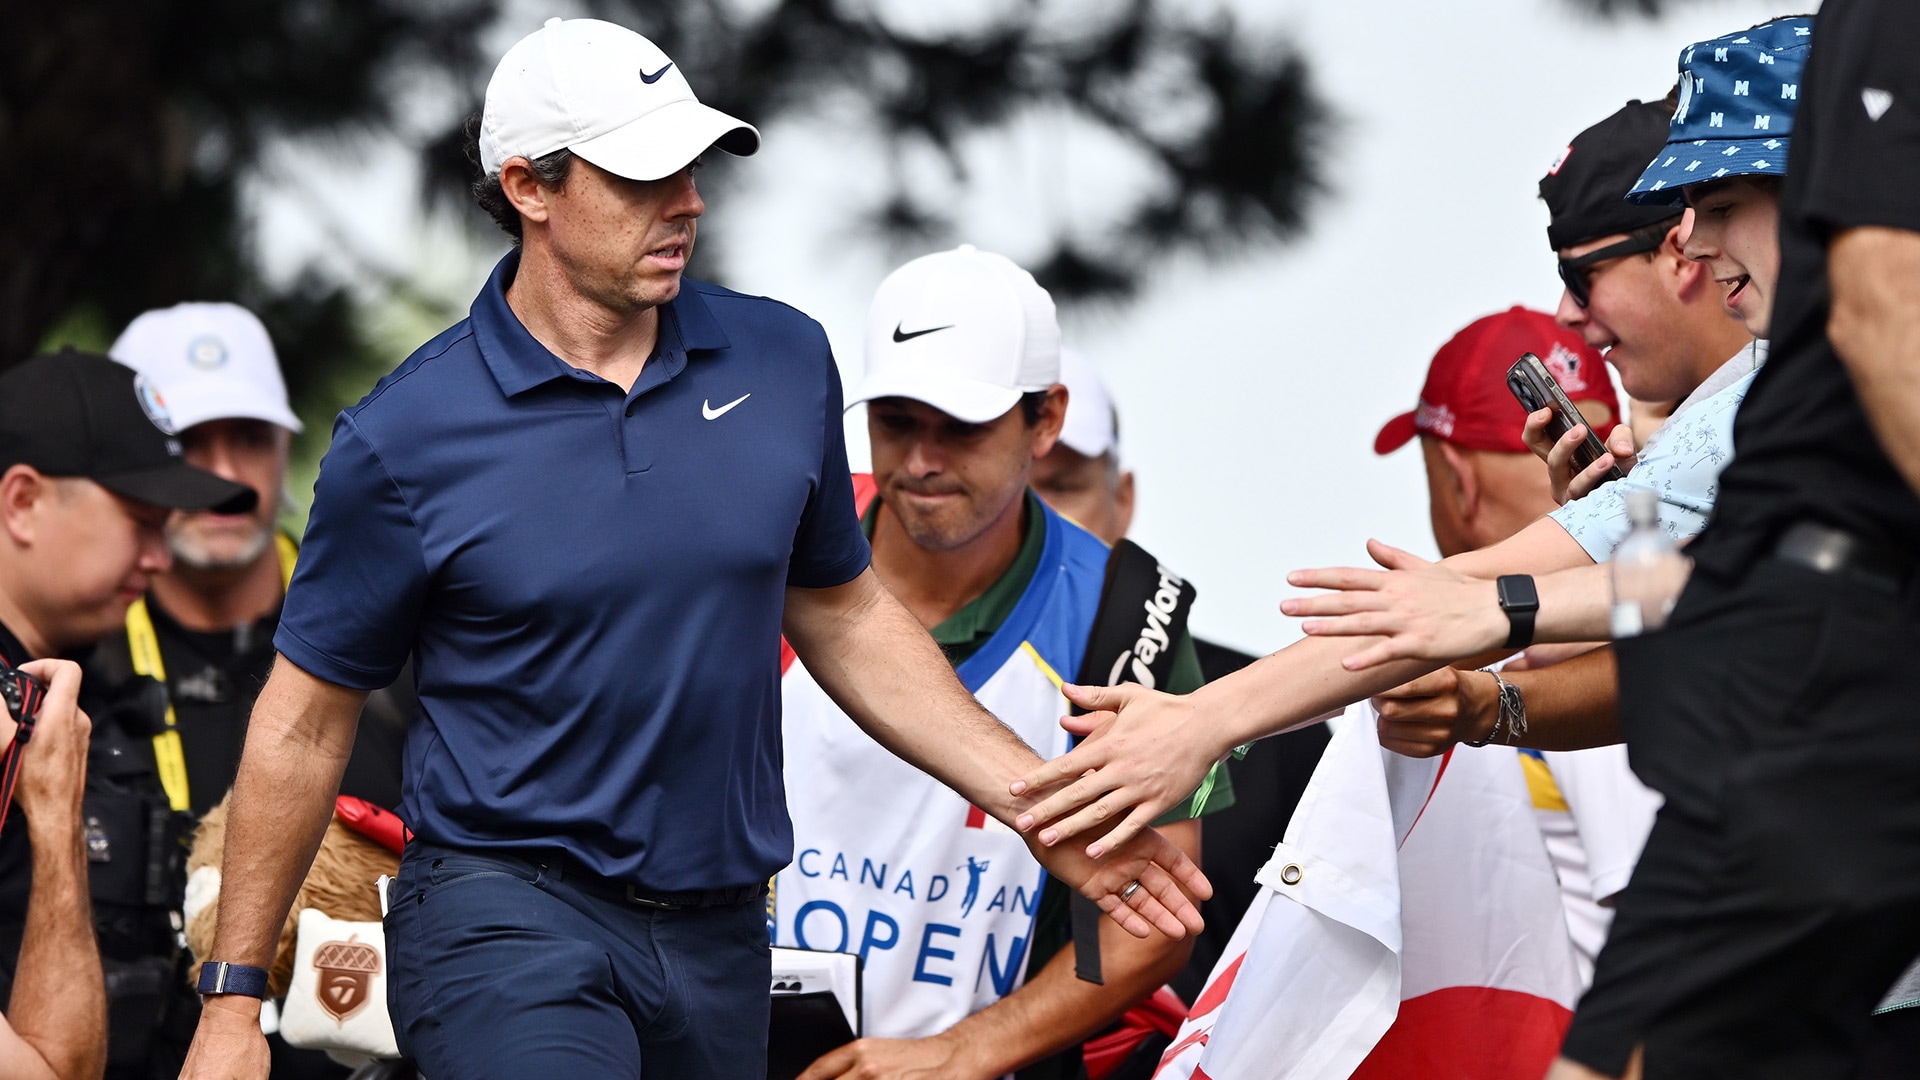 After drama a year ago, Rory McIlroy says another Canadian win ‘solely for me’